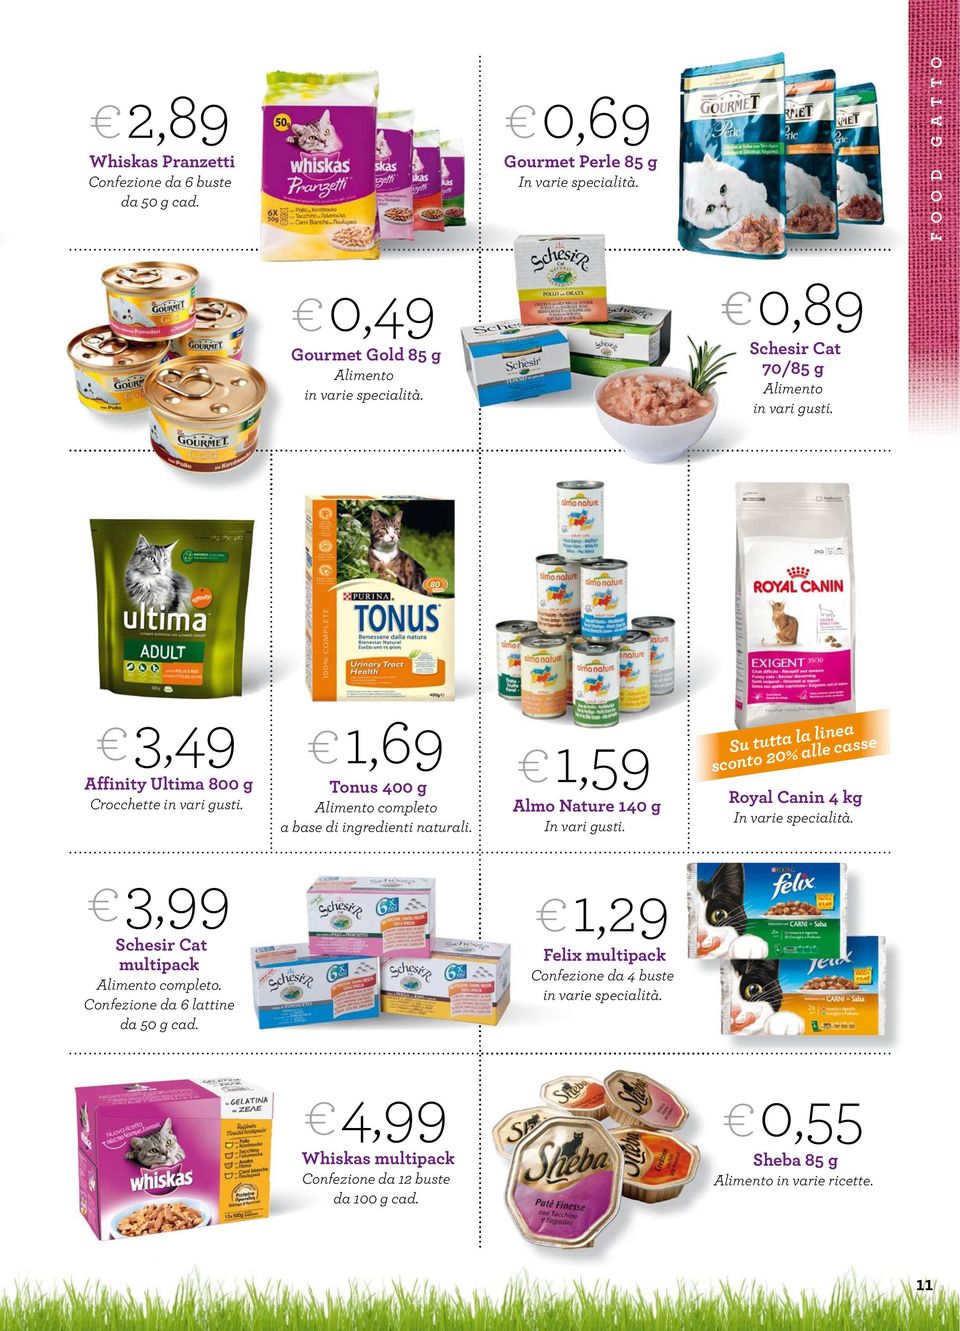 1,59 Almo Nature 140 g In vari gusti. sconto 20% alle casse Royal Canin 4 kg In varie specialità. 3,99 Schesir Cat multipack Alimento completo.